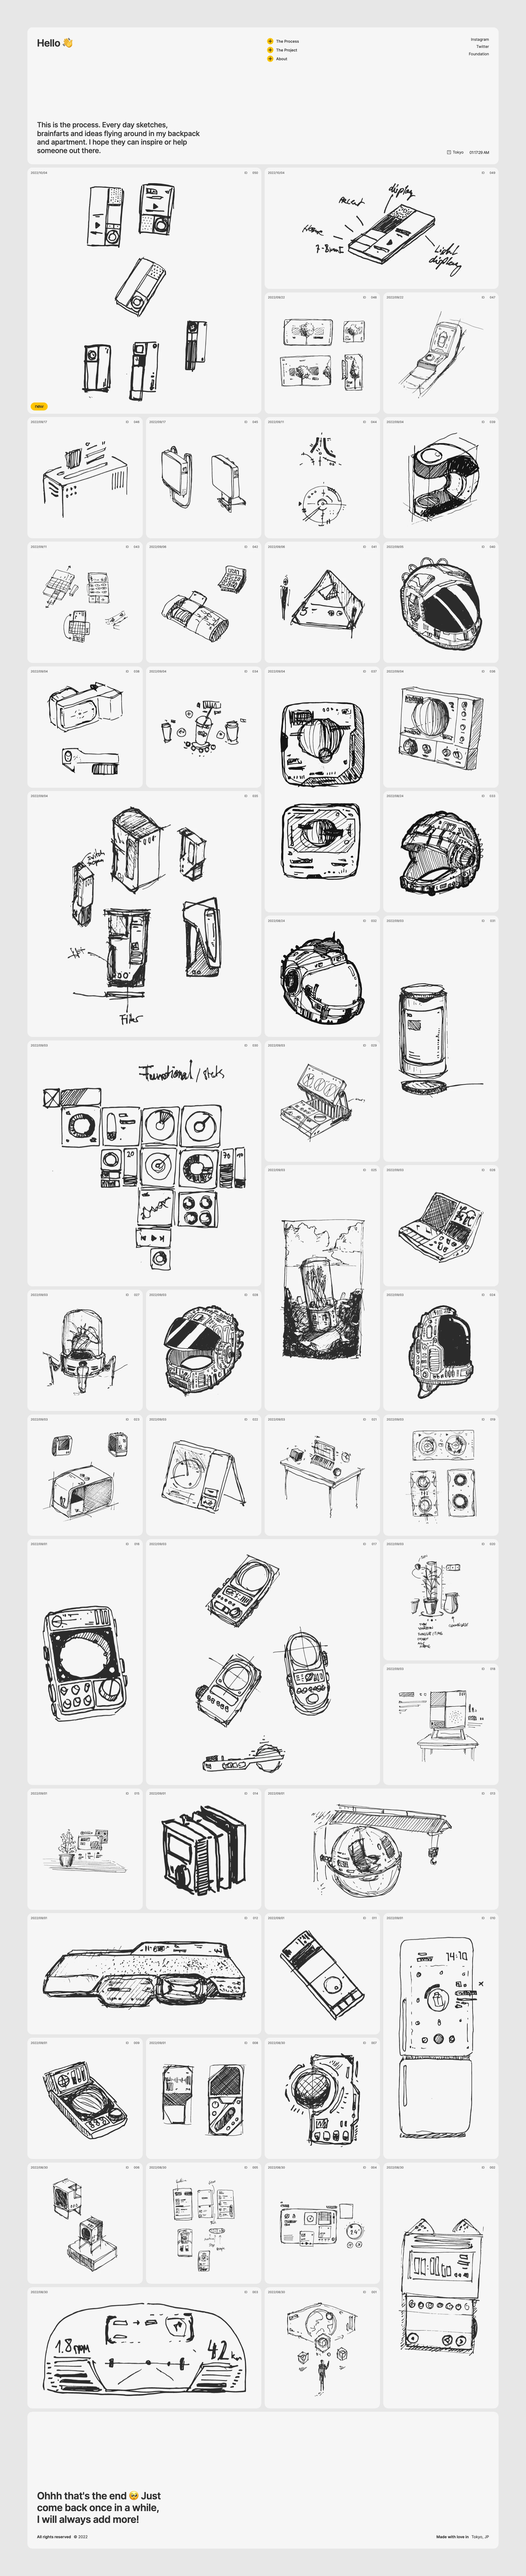 theprocess Landing Page Example: This is the process. Every day sketches, brainfarts and ideas flying around in my backpack and apartment. I hope they can inspire or help someone out there.